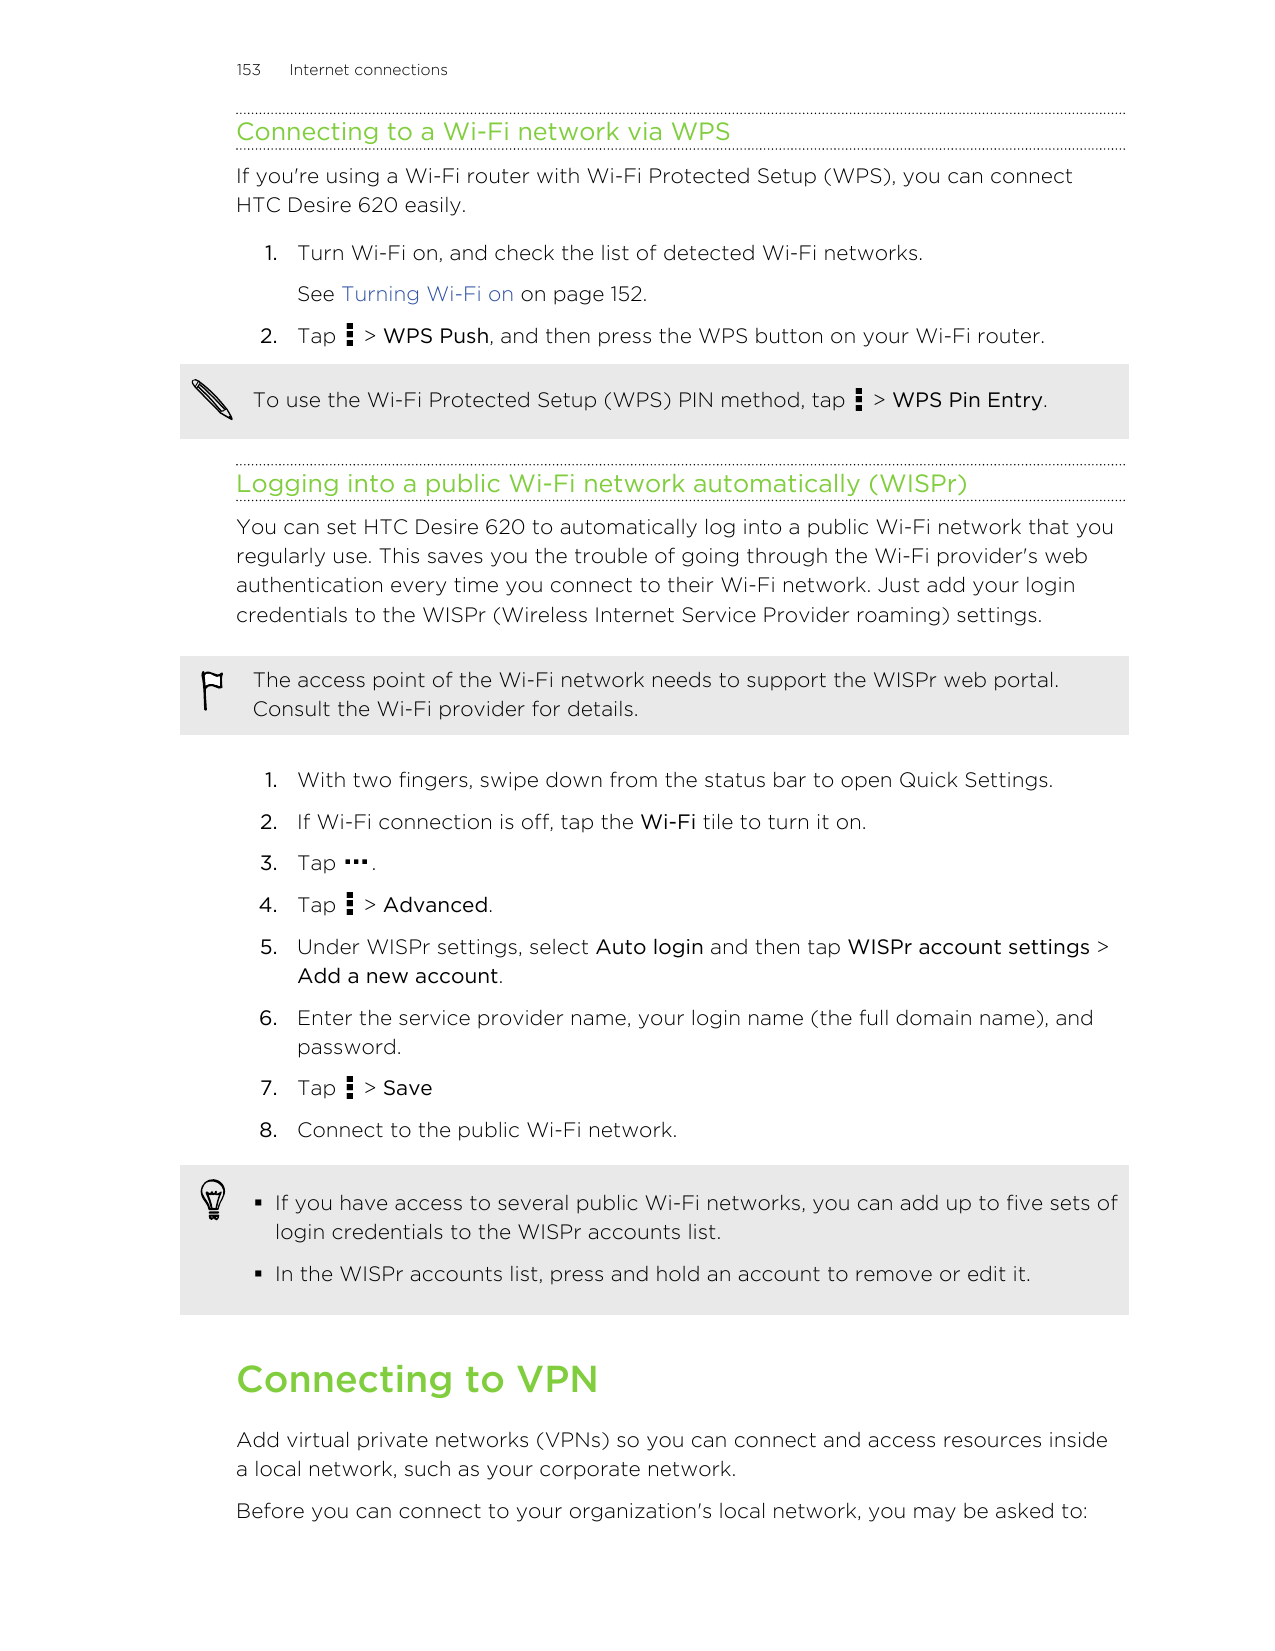 153Internet connectionsConnecting to a Wi-Fi network via WPSIf you're using a Wi-Fi router with Wi-Fi Protected Setup (WPS), you